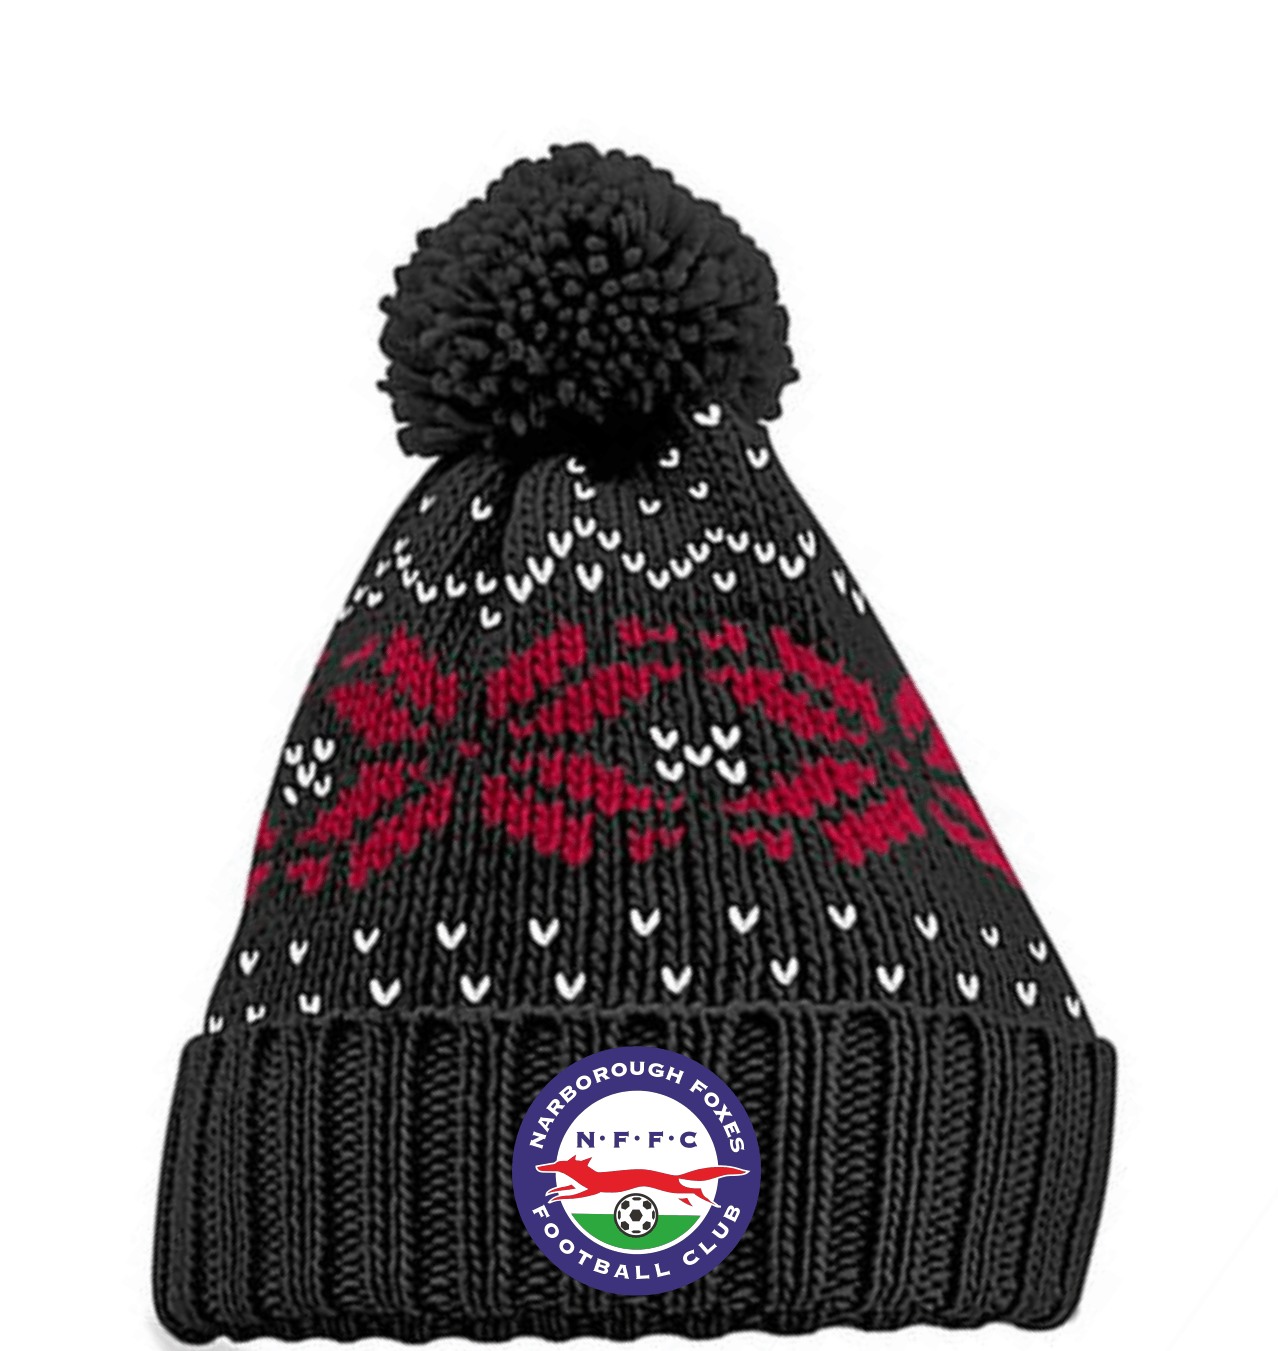 Narborough Foxes - Bobble Hat